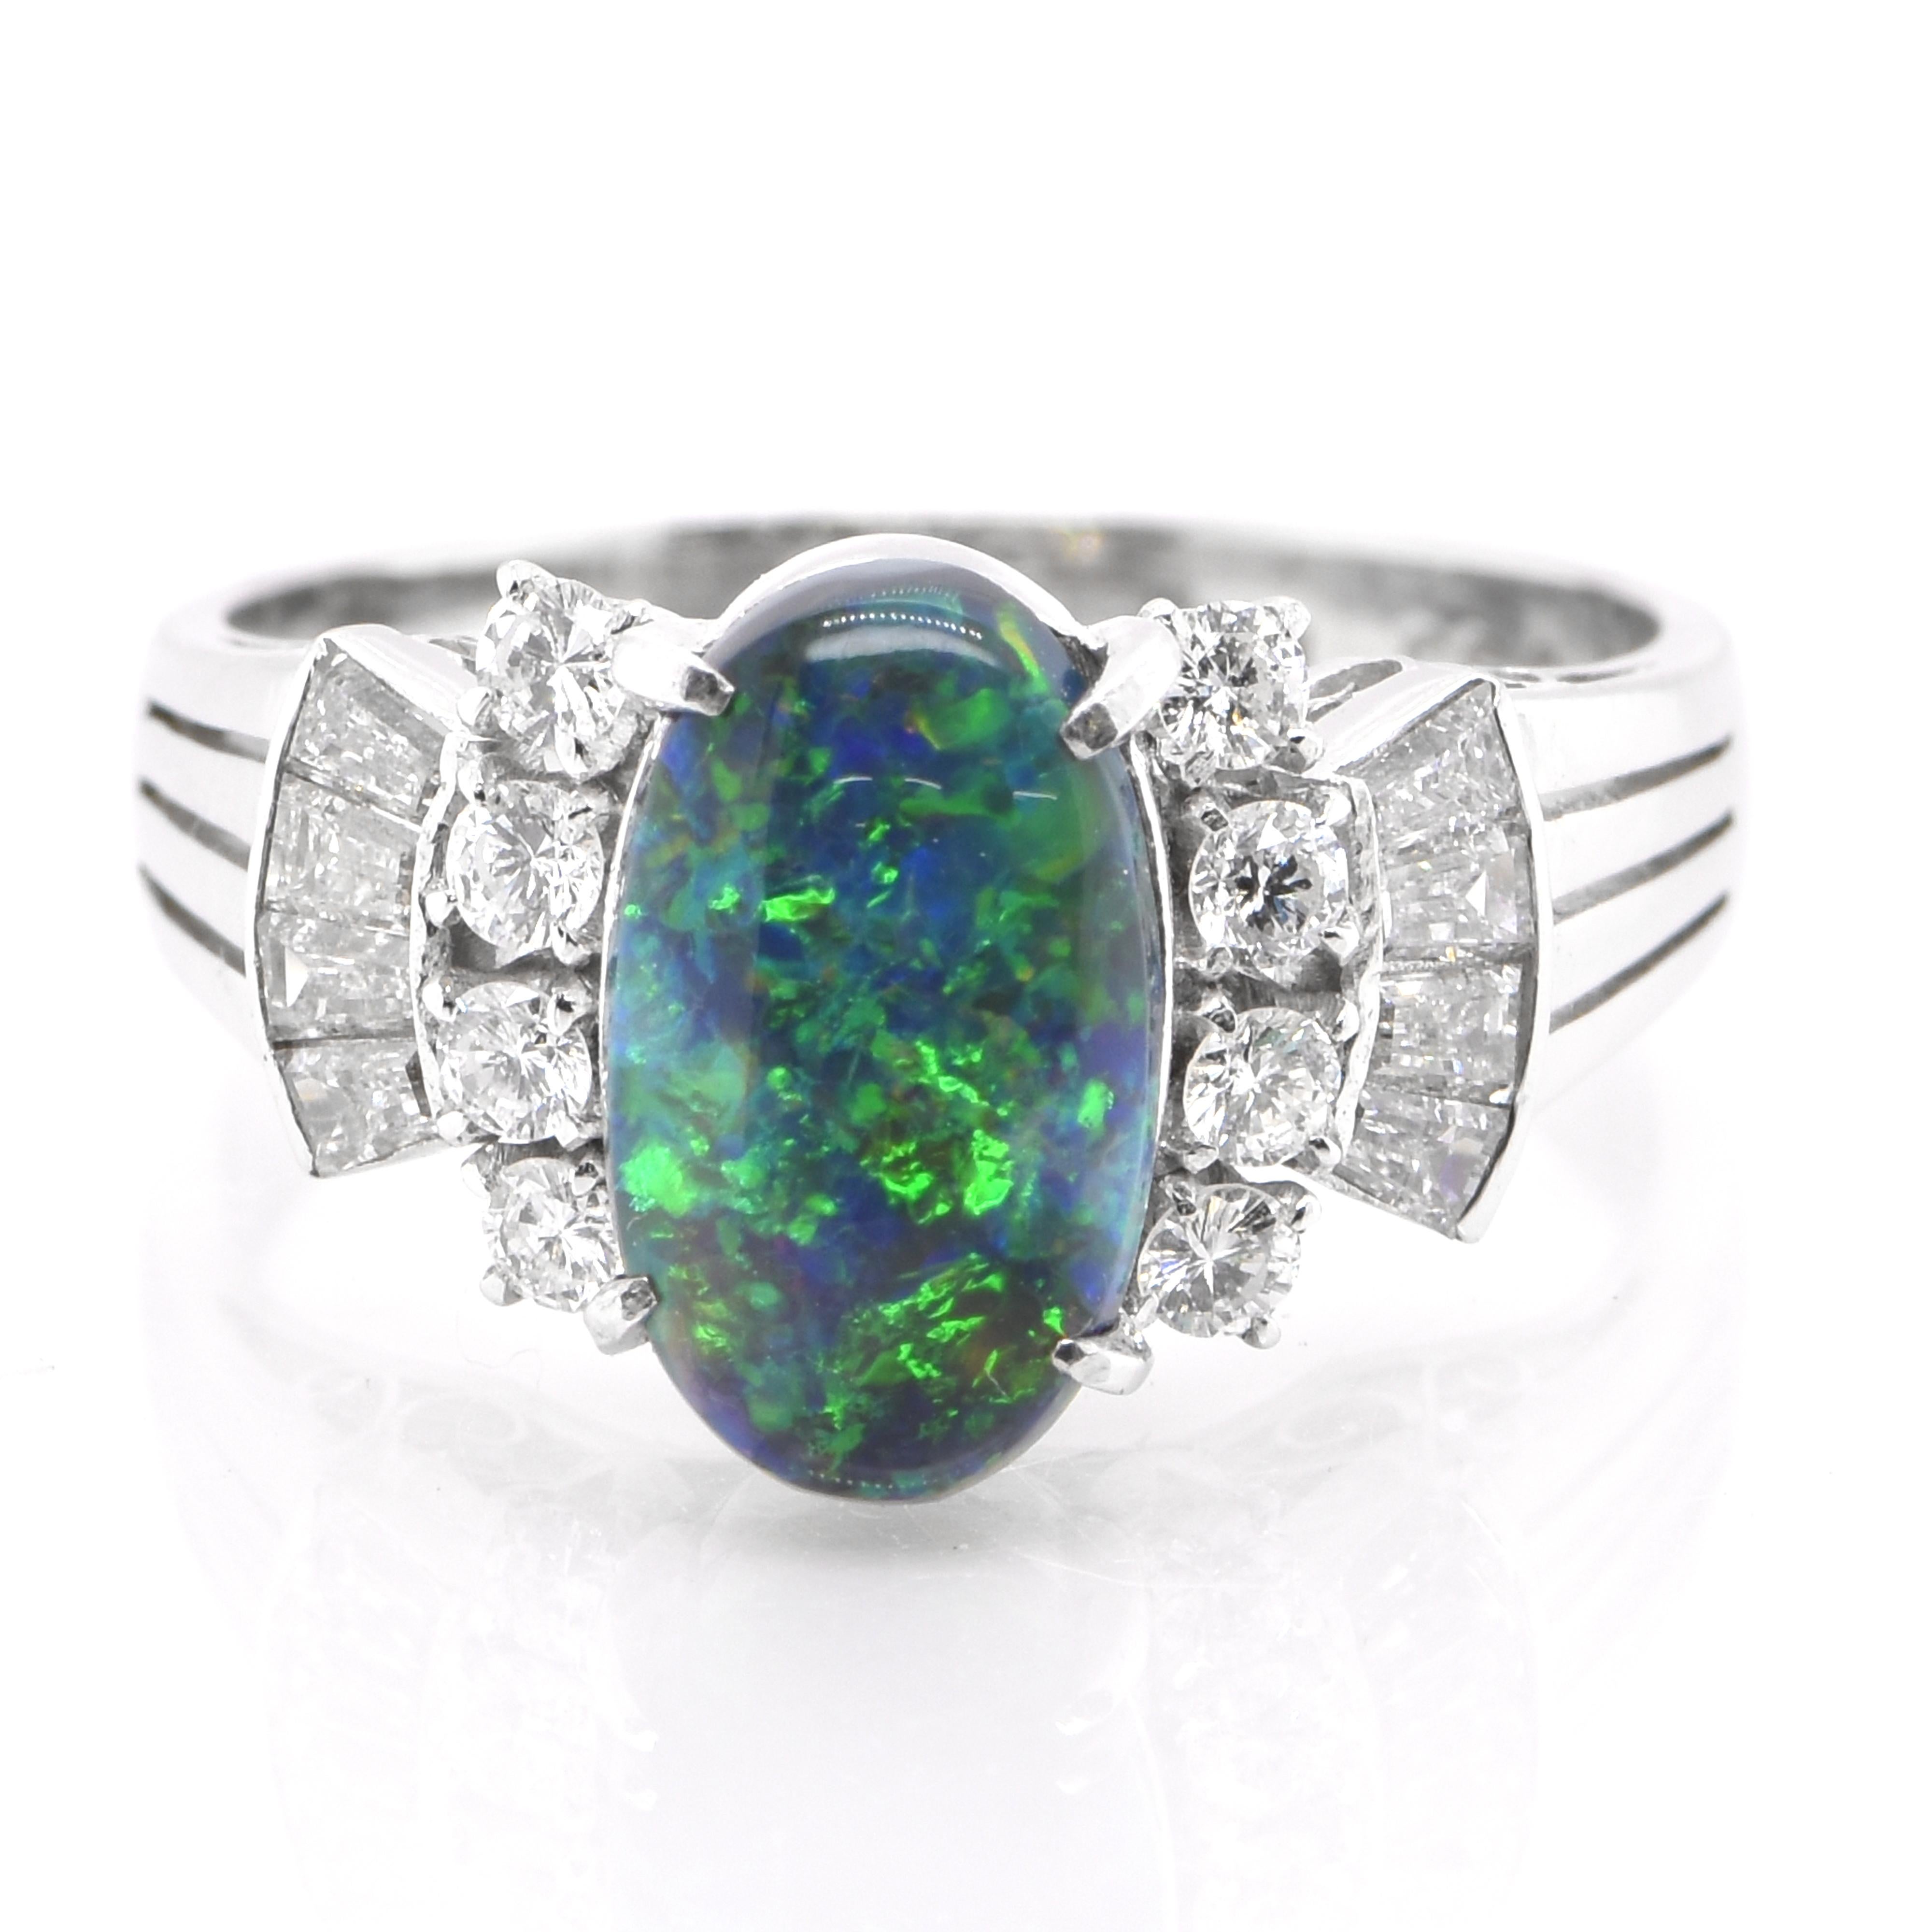 A beautiful ring featuring a 0.98 Carat, Natural, Australian Black Opal and 0.35 Carats of Diamond Accents set in Platinum. The Opal displays very good play of color! Opals are known for exhibiting flashes of rainbow colors known as 